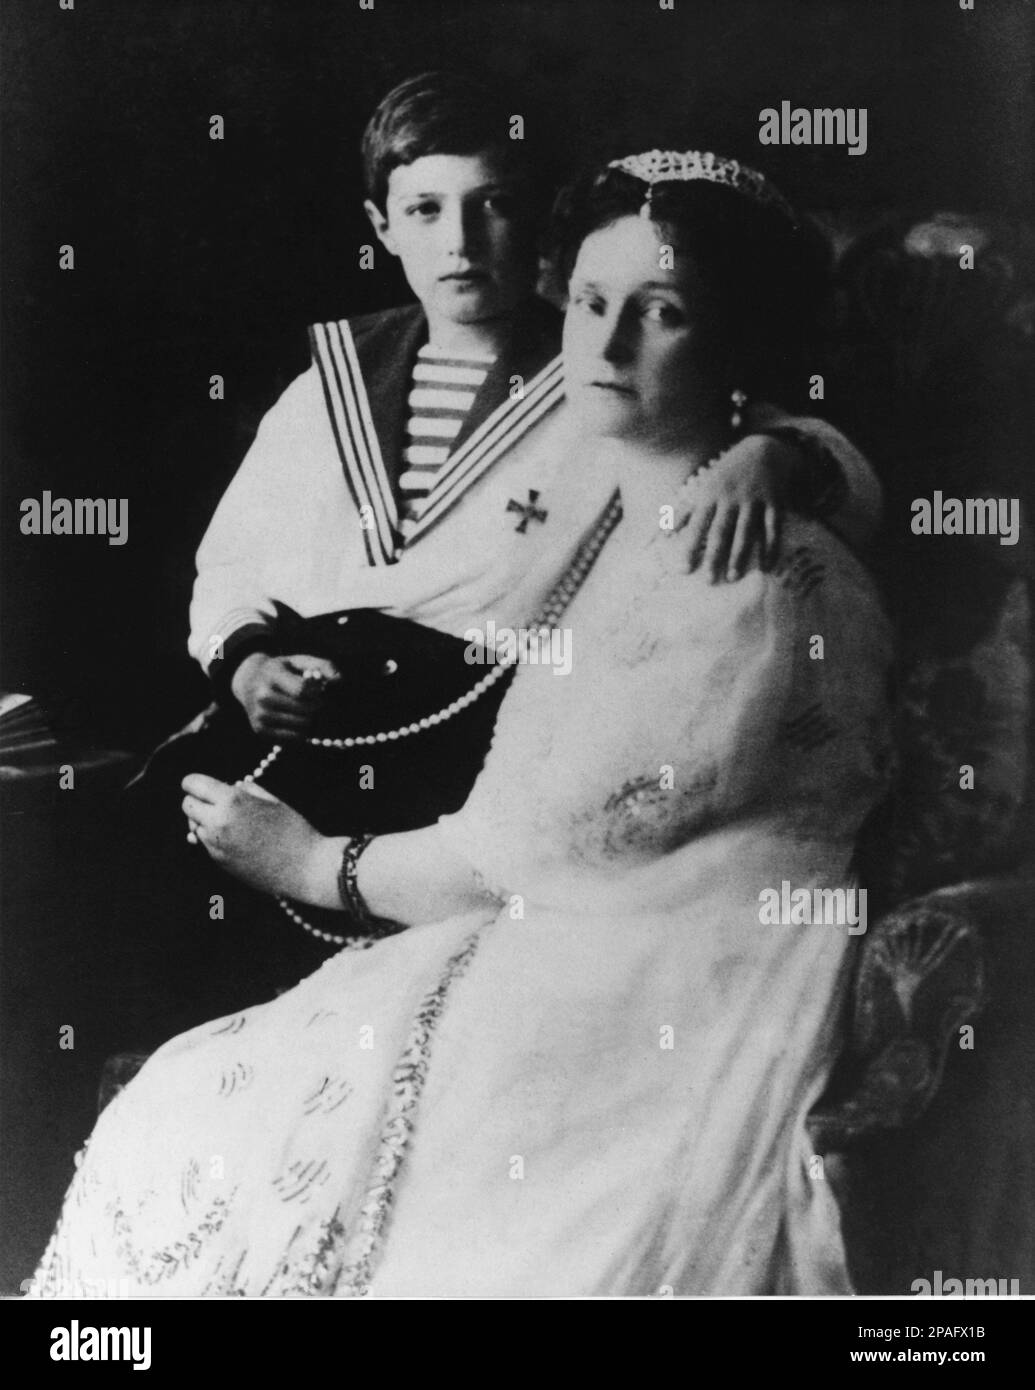 The russian crownprince Grand Duke Tsarevich ALEXEI Nikolaevich ROMANOV (1904 - 1918 ) with mother ALEXANDRA , born Princess Alix of Hesse and by Rhine ( 1872 - 1918 ).  The the youngest child and the only son of Tsar Nicholas II of Russia and Alexandra Fyodorovna .  His mother's reliance on the starets Grigori Rasputin to treat Alexei's haemophilia helped bring about the end of Imperial Russia. His murder following the Russian Revolution of 1917 resulted in his canonization as a passion bearer of the Russian Orthodox Church. He was two weeks shy of his fourteenth birthday when he was murdered Stock Photo